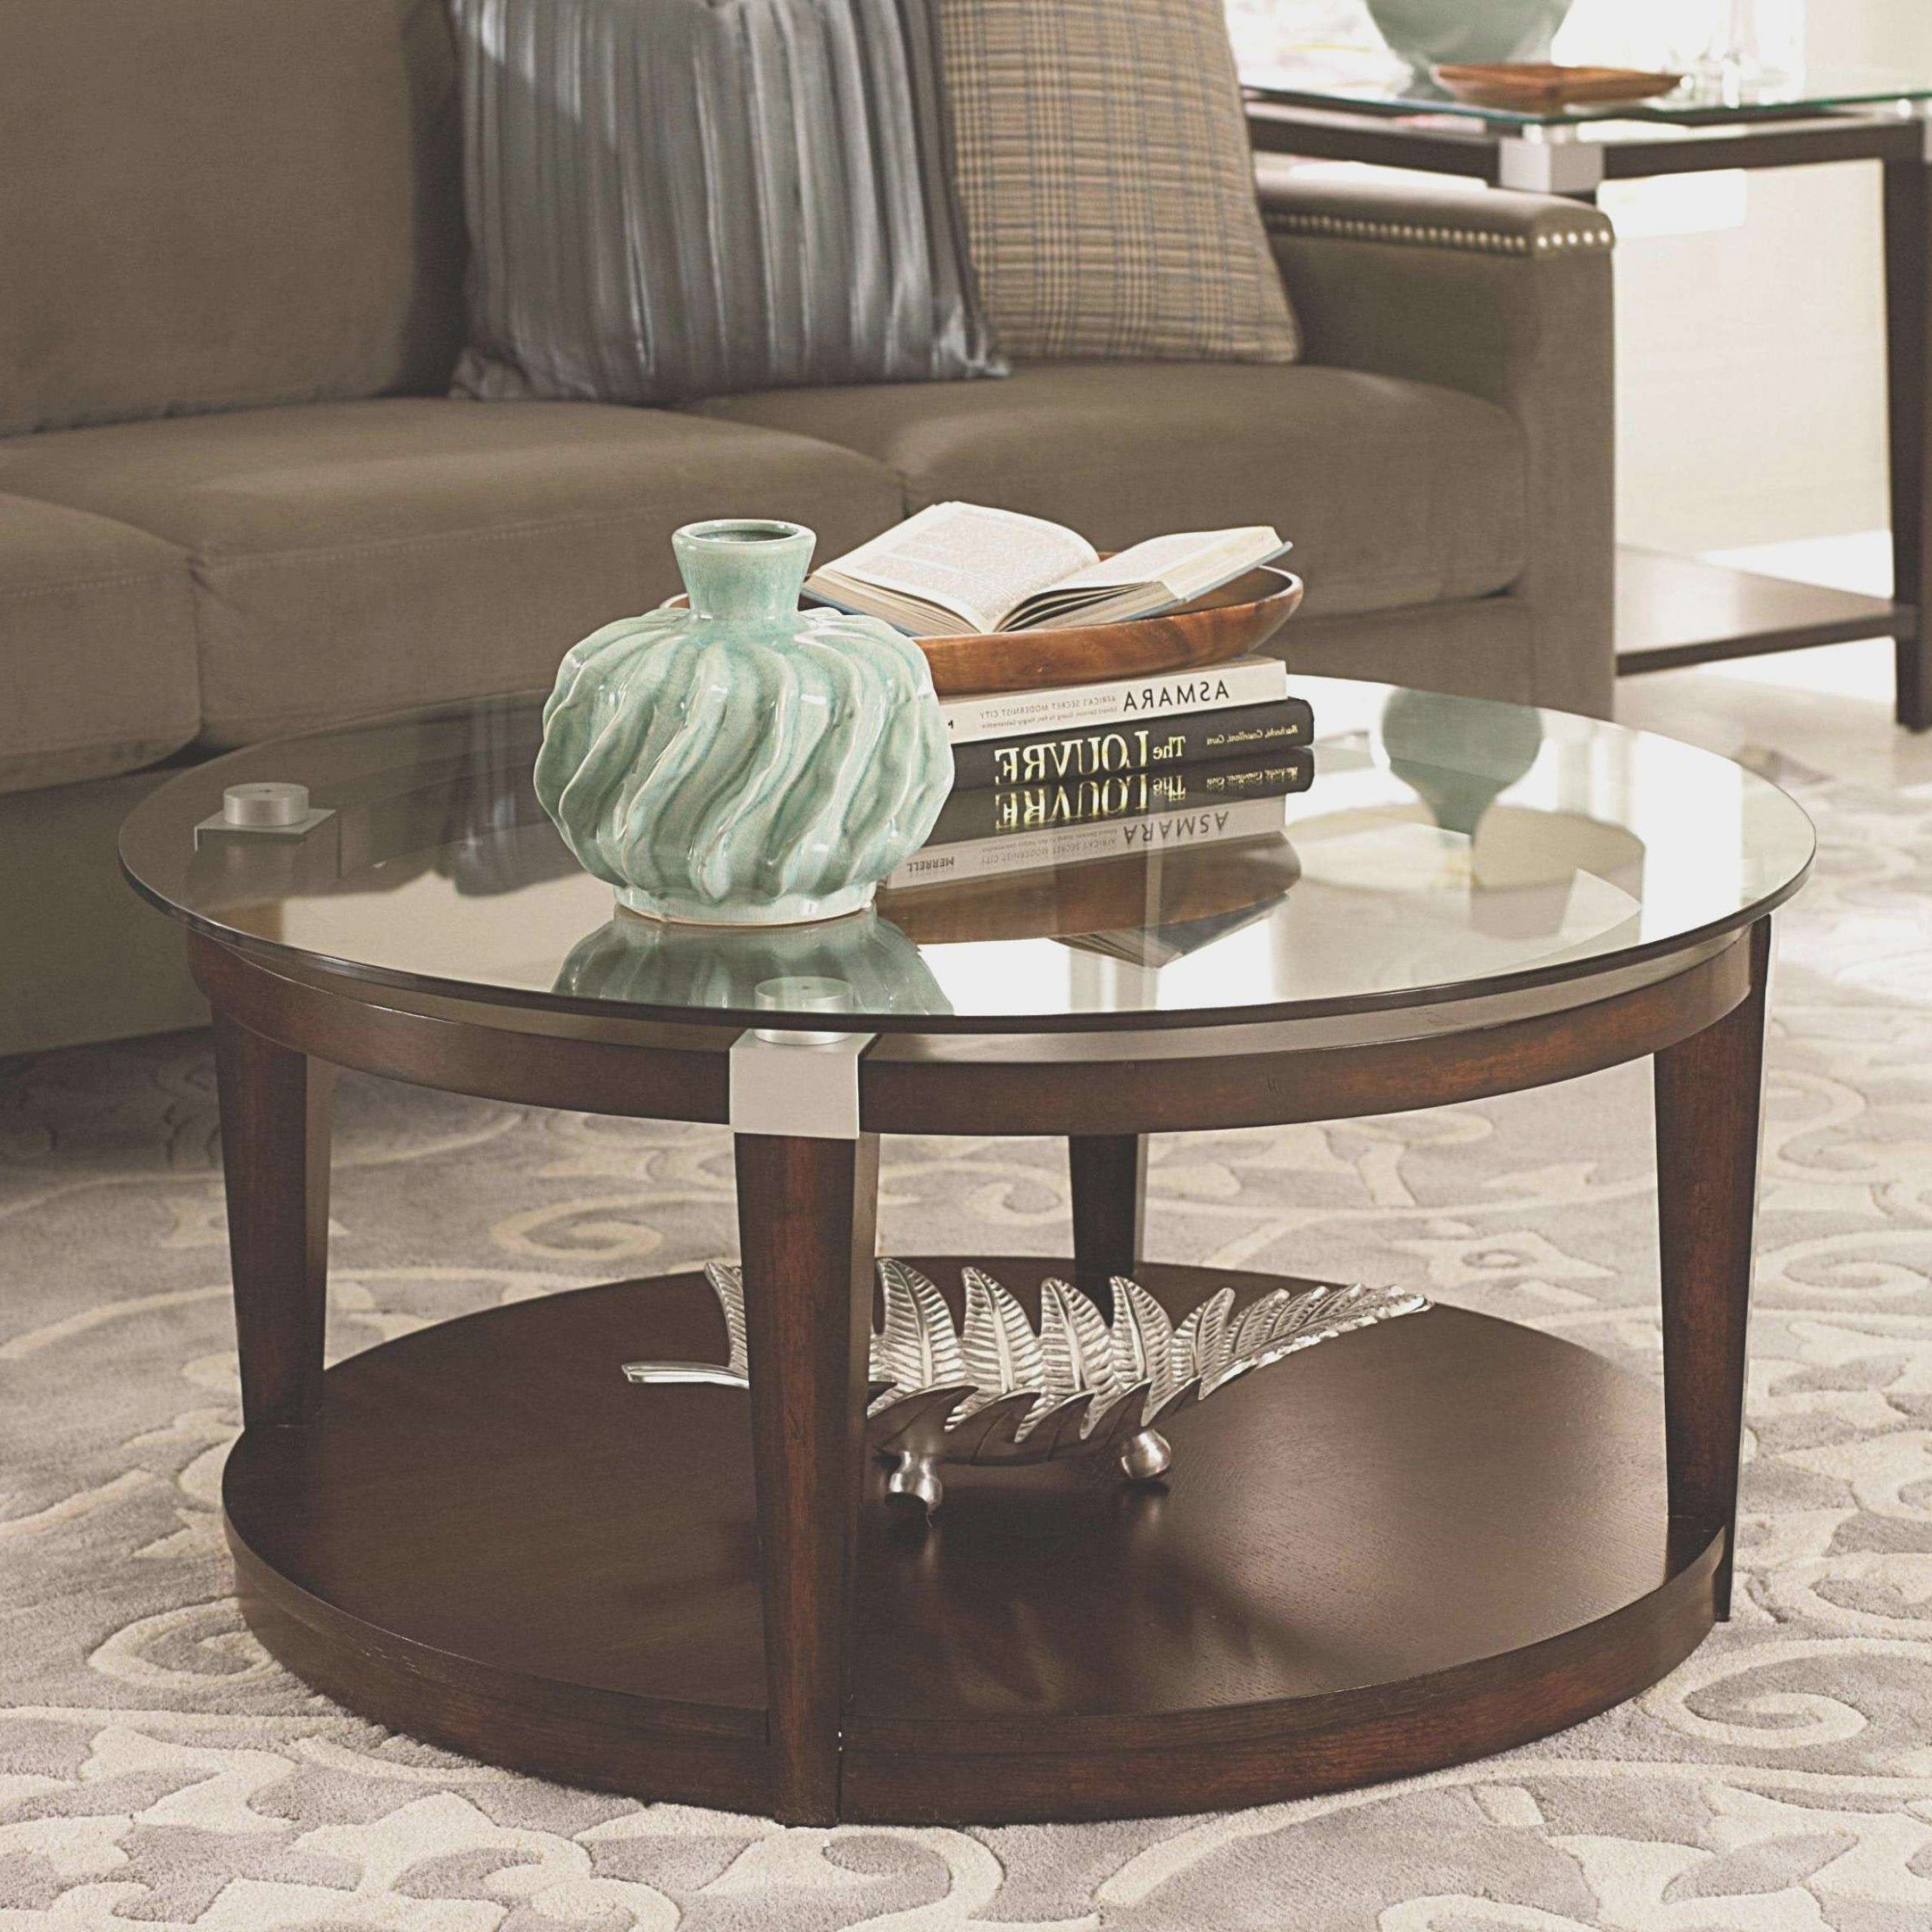 Black Round Glass Top Cocktail Tables Throughout Well Liked 14 Round Coffee Table Decor Ideas Gallery (View 1 of 20)